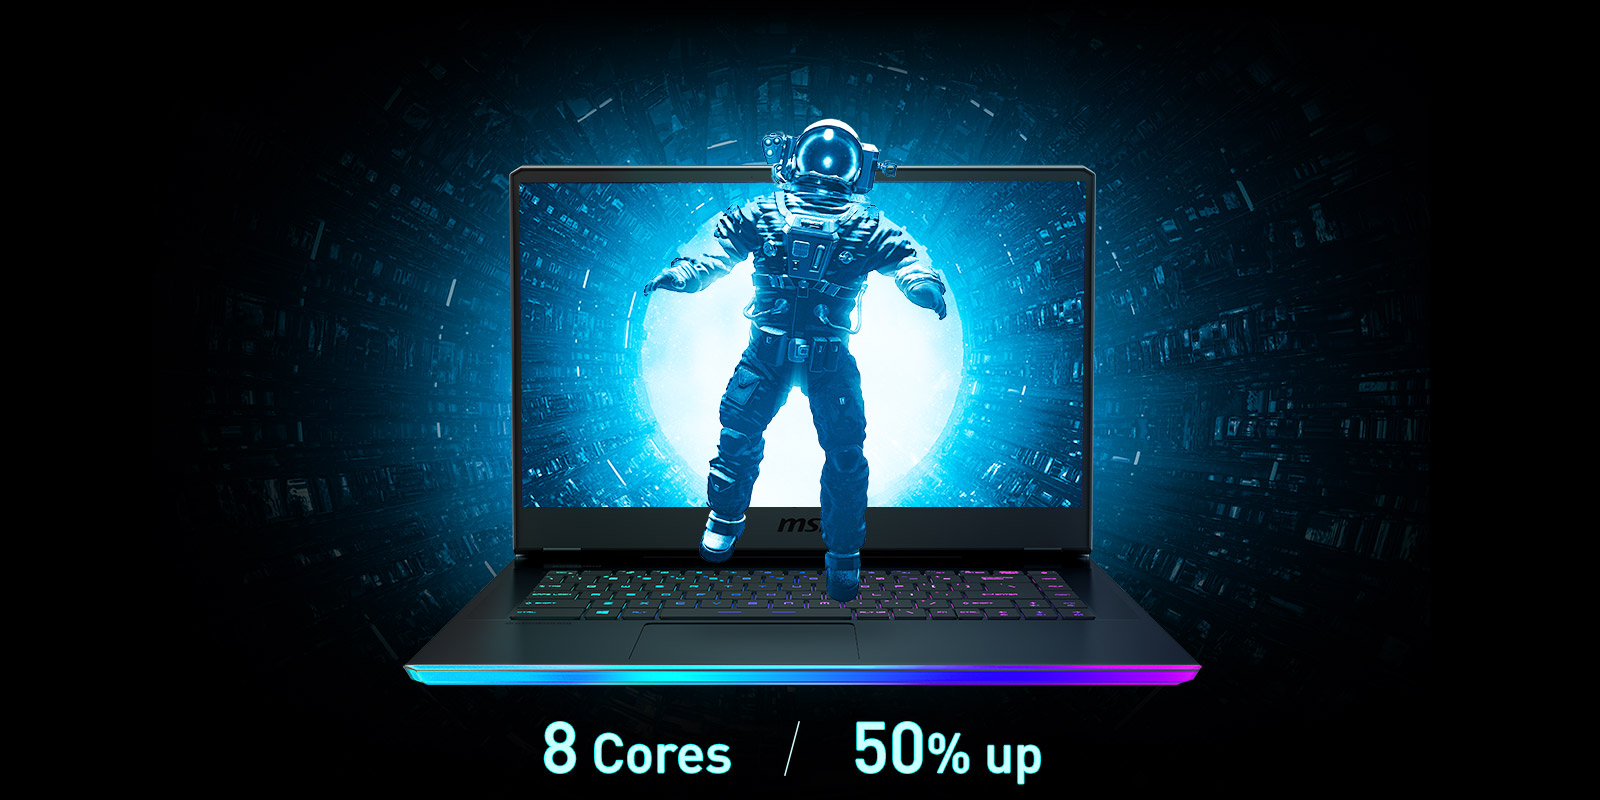 An astronaut is coming out from laptop screen. Text below says: 8 Cores / 50% Up